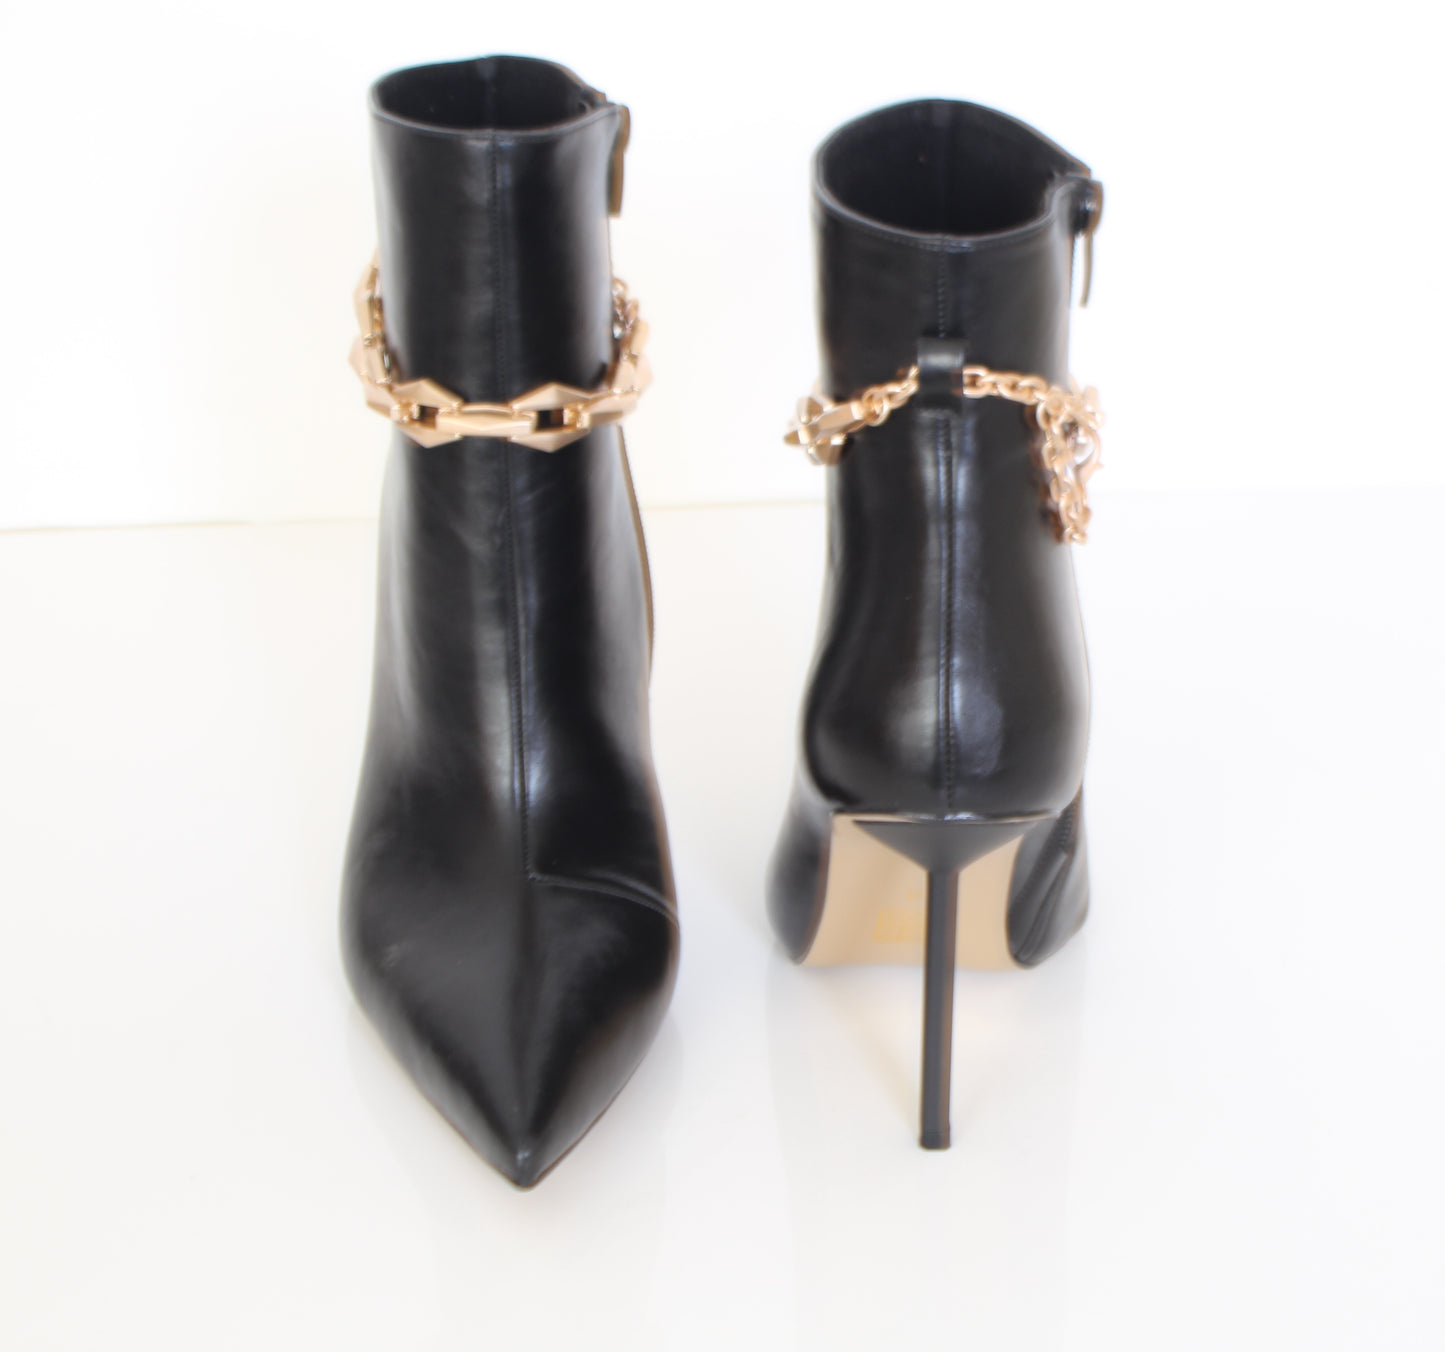 PINO VERDE Booties with Chain